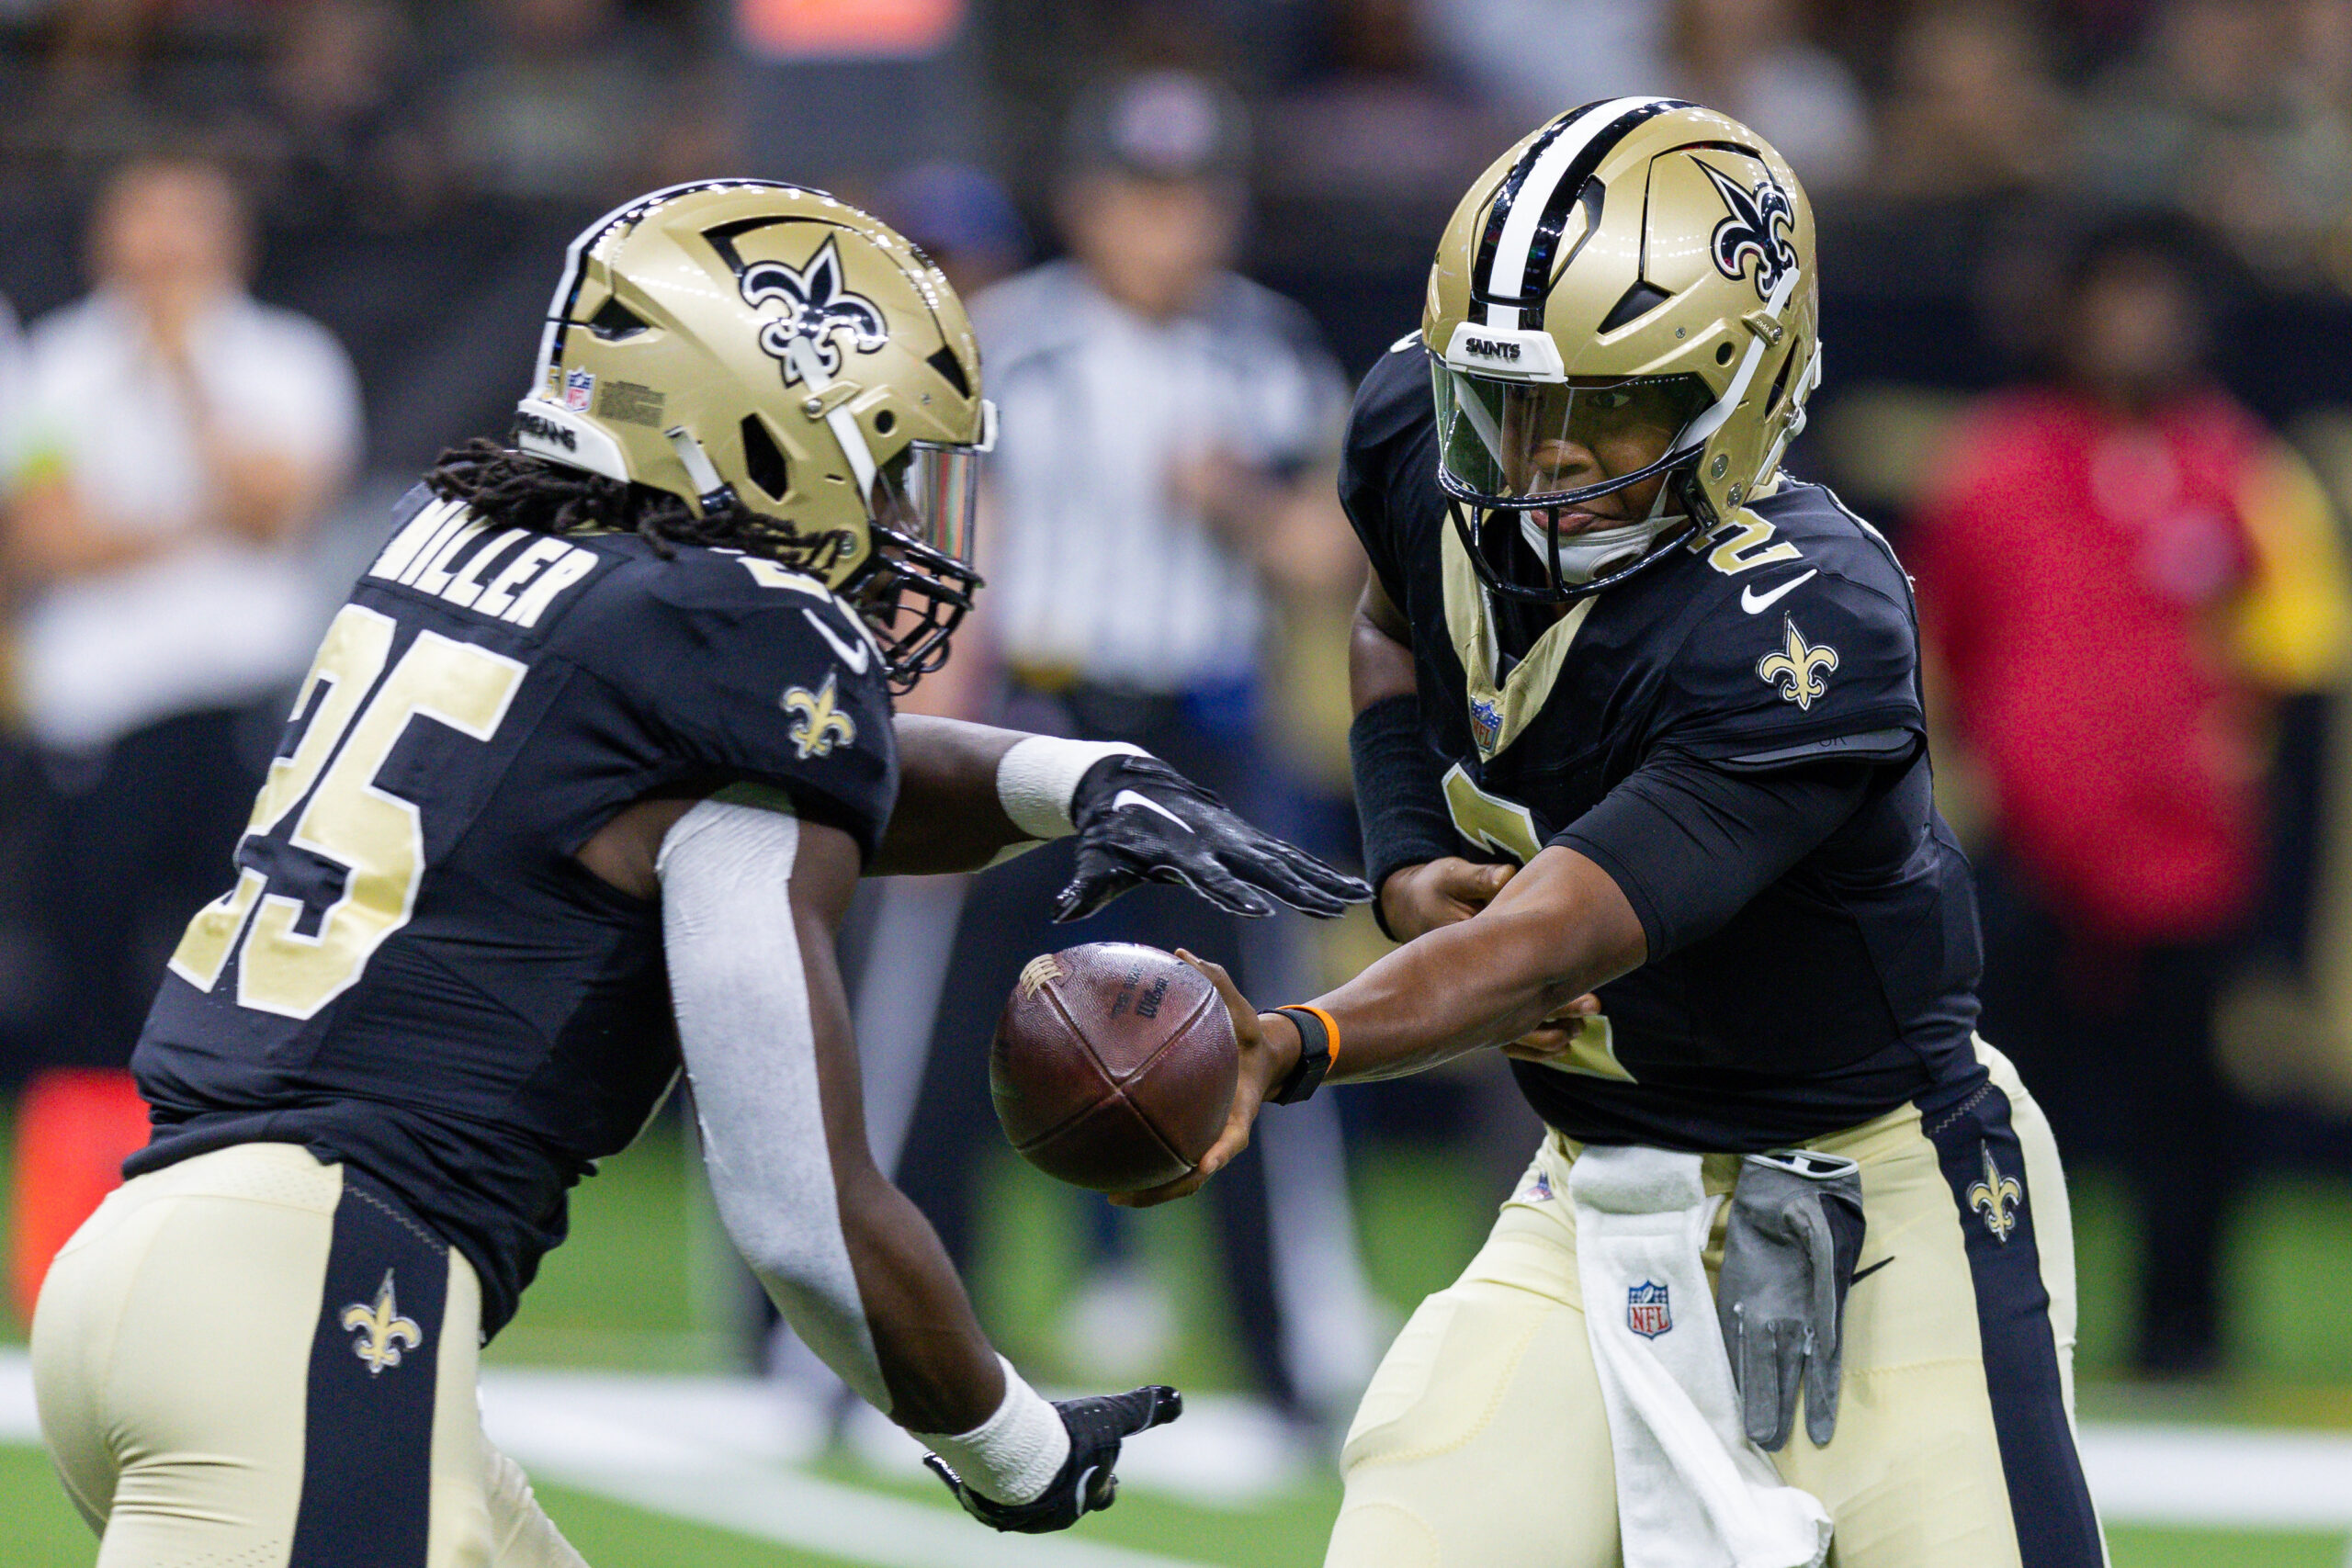 Kendre Miller Injury Update: Latest on New Orleans Saints' RB